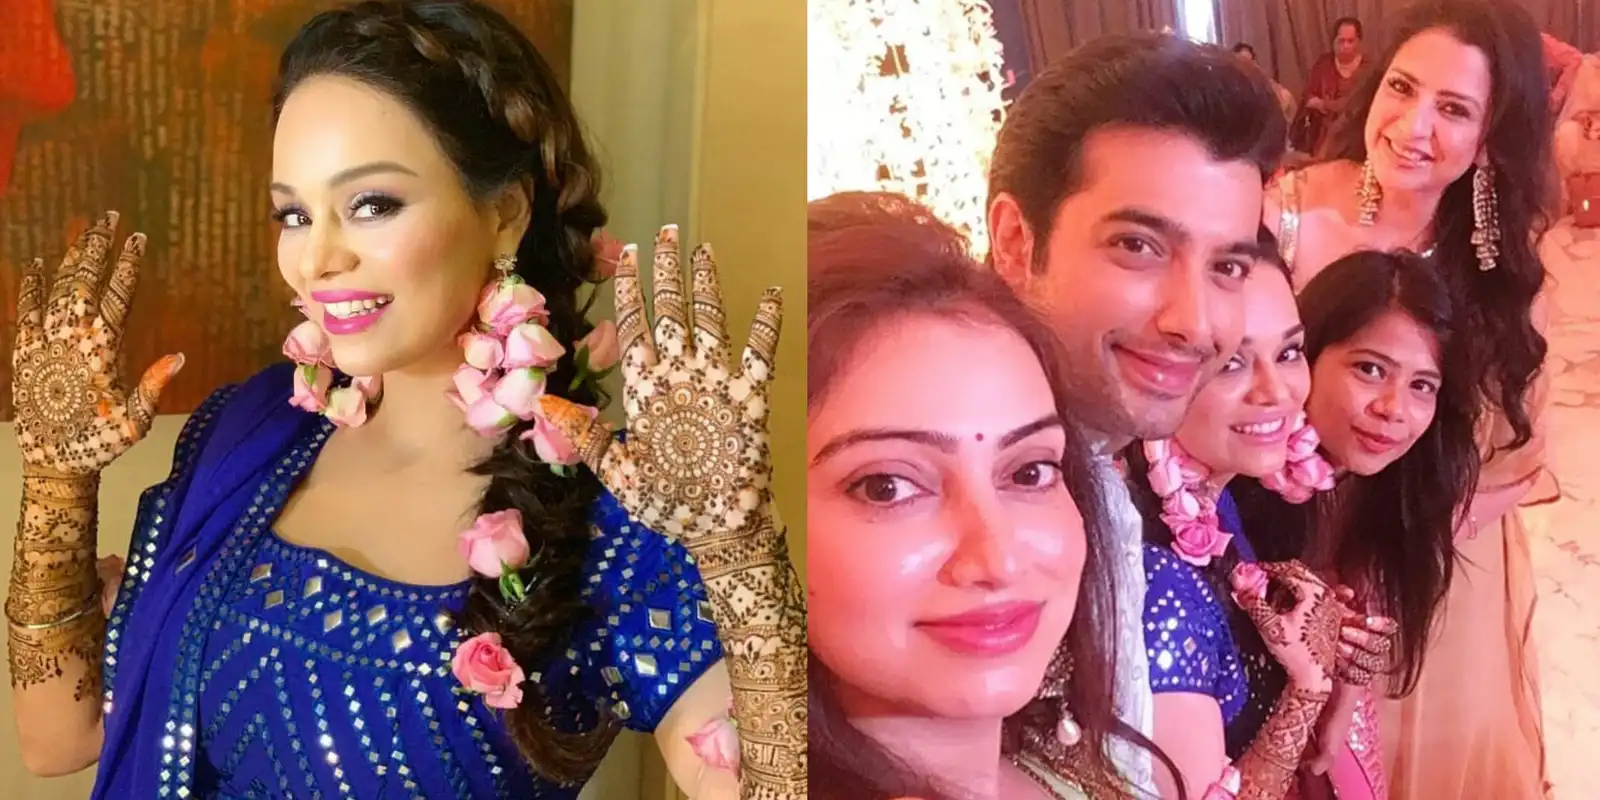 Check Out These Pictures And Videos From Ssharad Malhotra And Ripci Bhatia's Mehendi Ceremony!